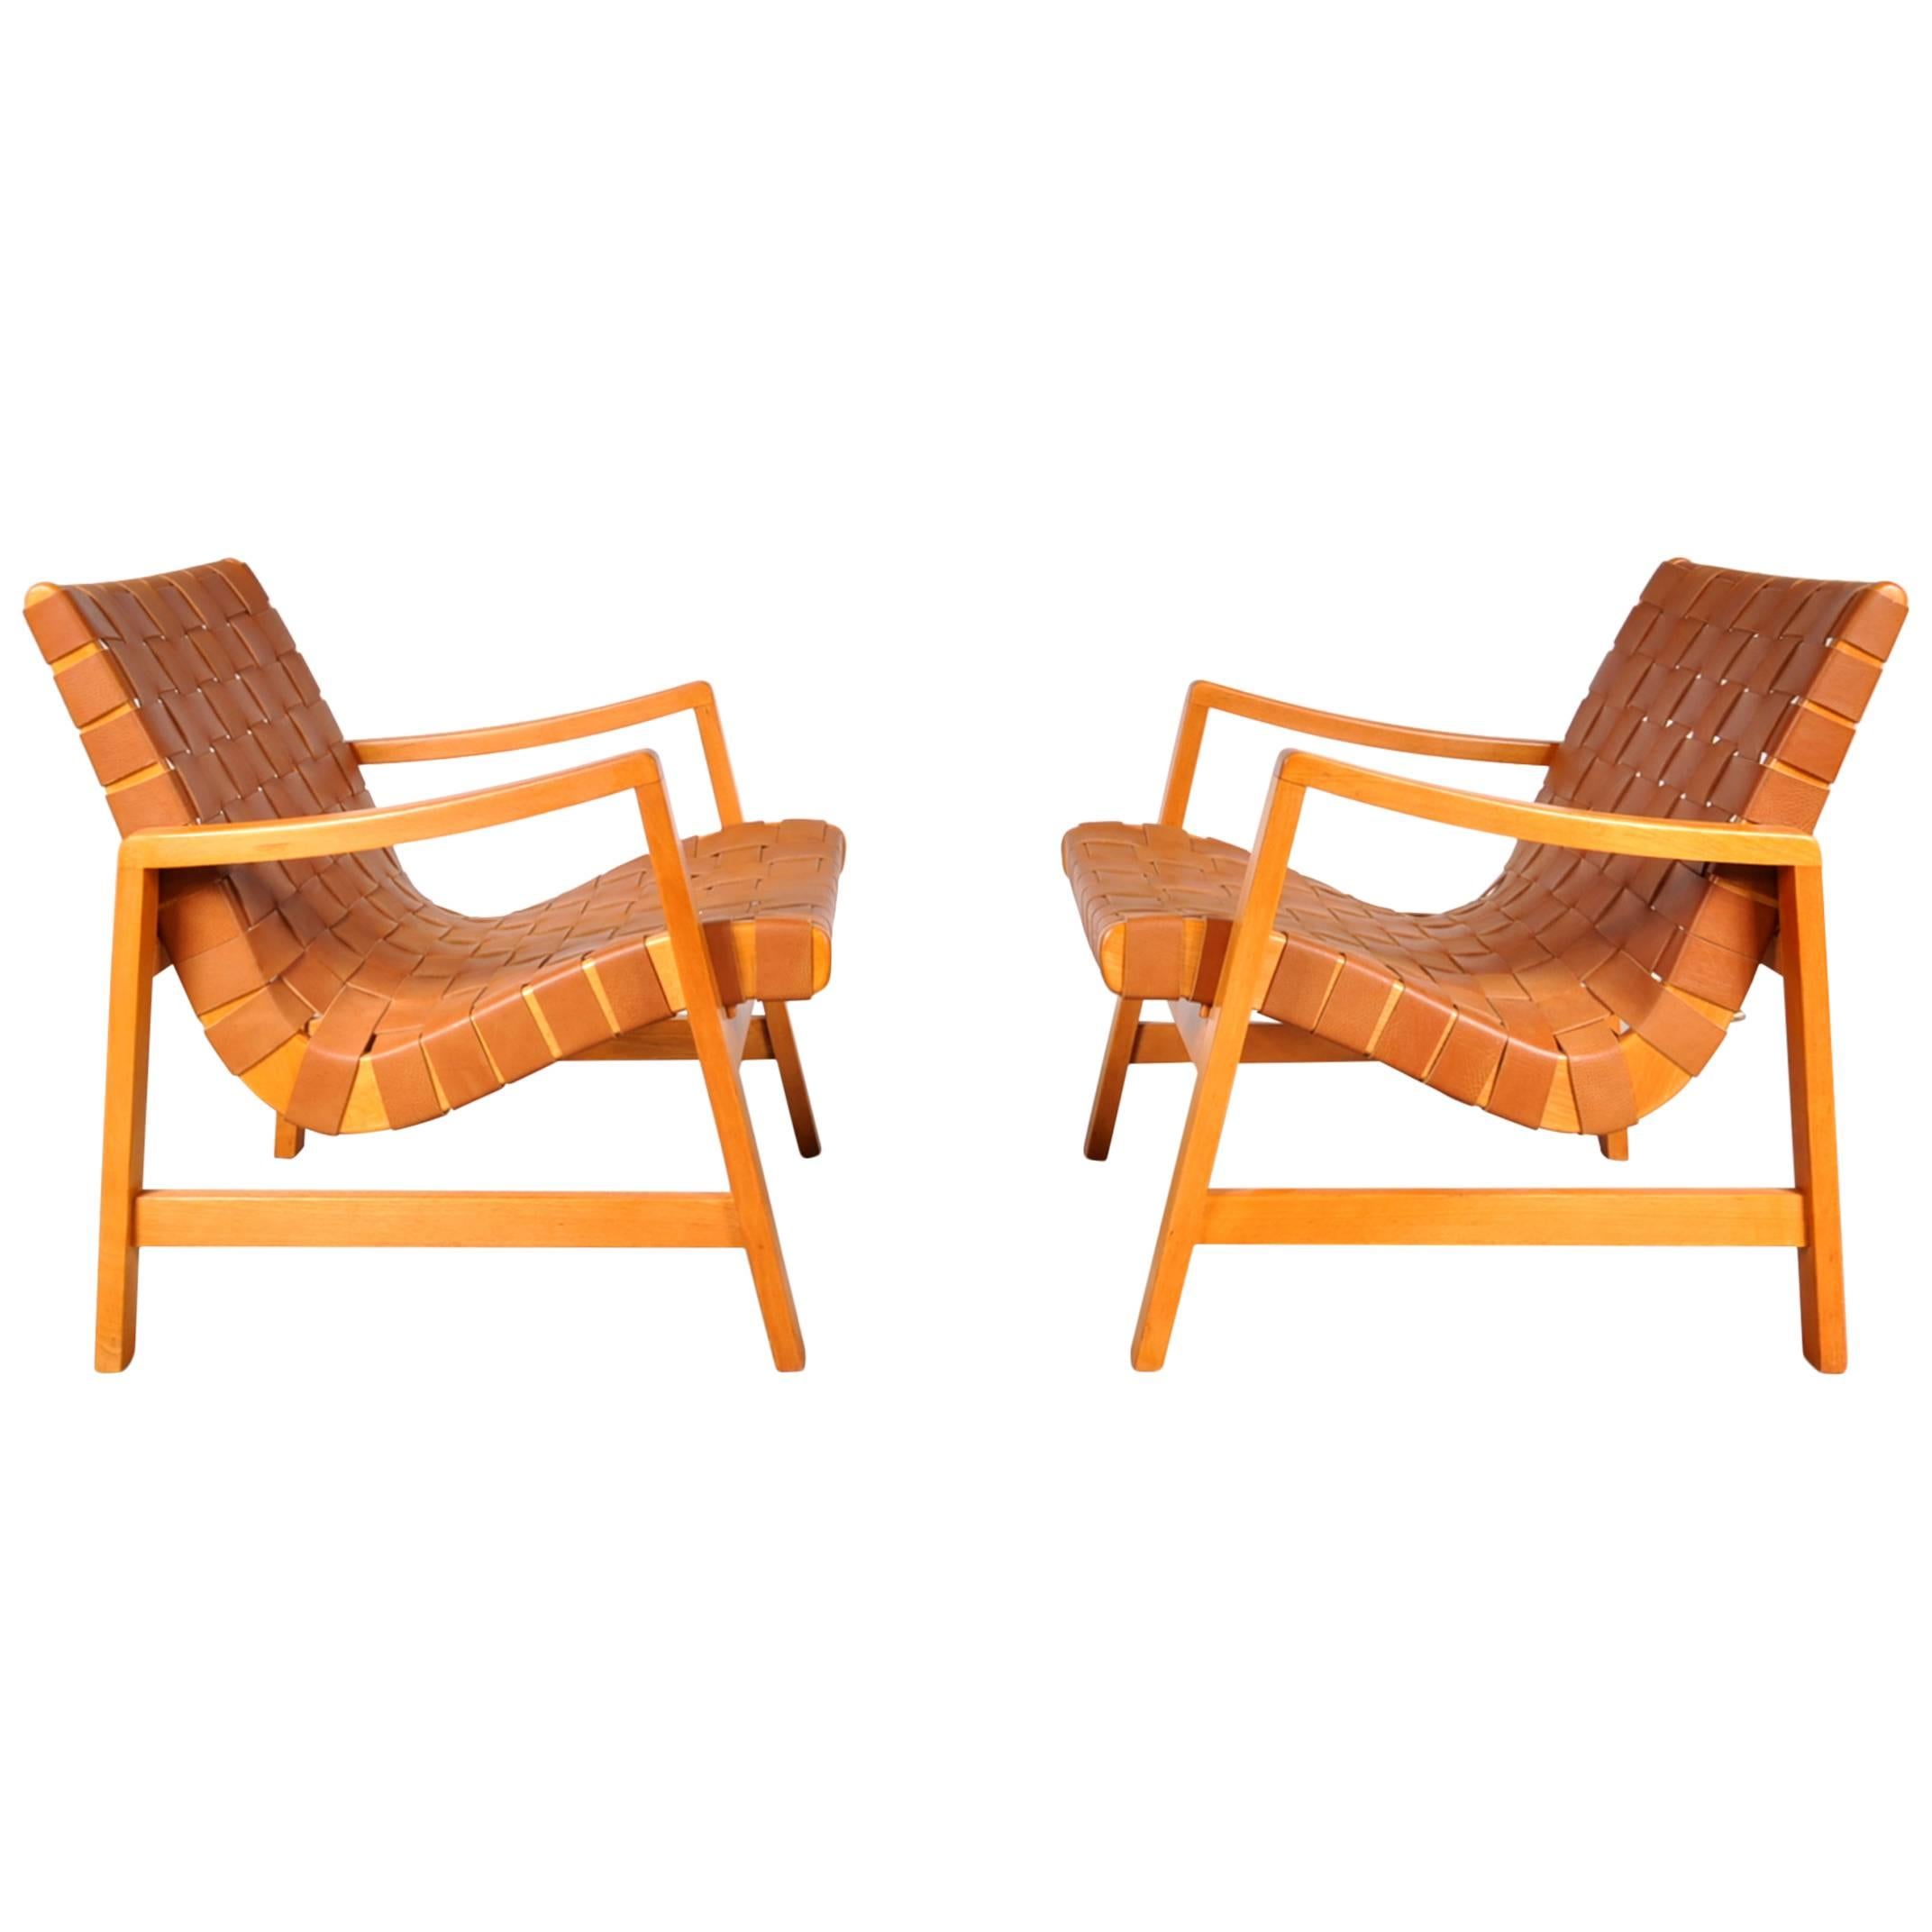 Pair of Two "Vostra" Easy Chairs by Jens Risom for Knoll, USA in 1941